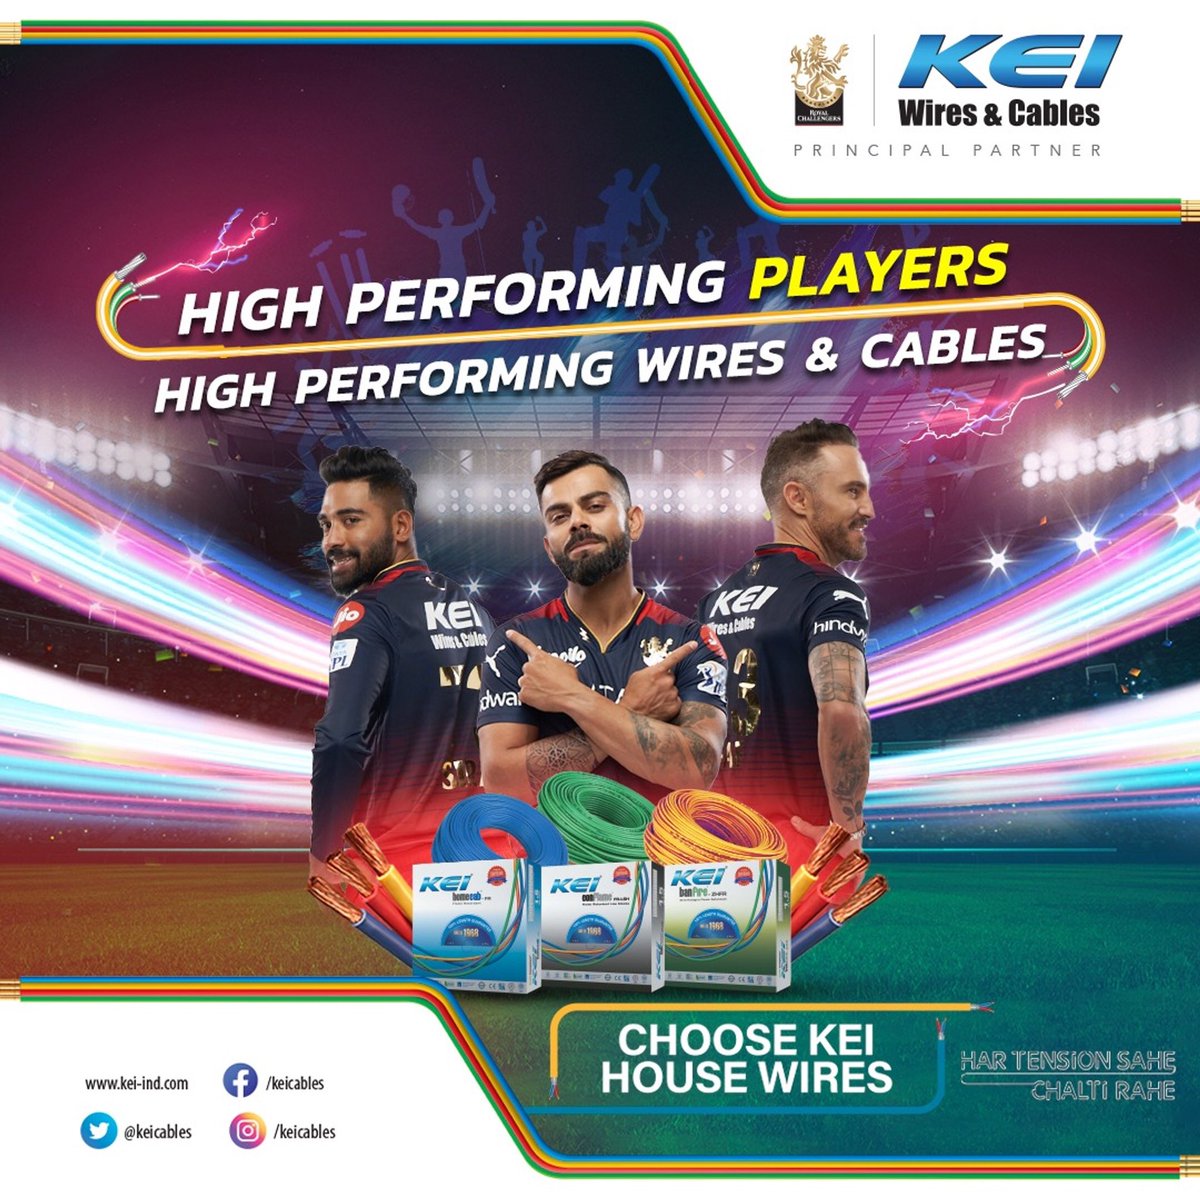 Battles never end. But to face the toughest ones, KEI Wires & Cables will always have your back!

Let’s continue playing bold & make our lives brighter and better.

@keicable 

#KEI #KEIWires #KEIWiresandCables #PureCopper #PurePerformance #RCB #IPL2023 #IPL…